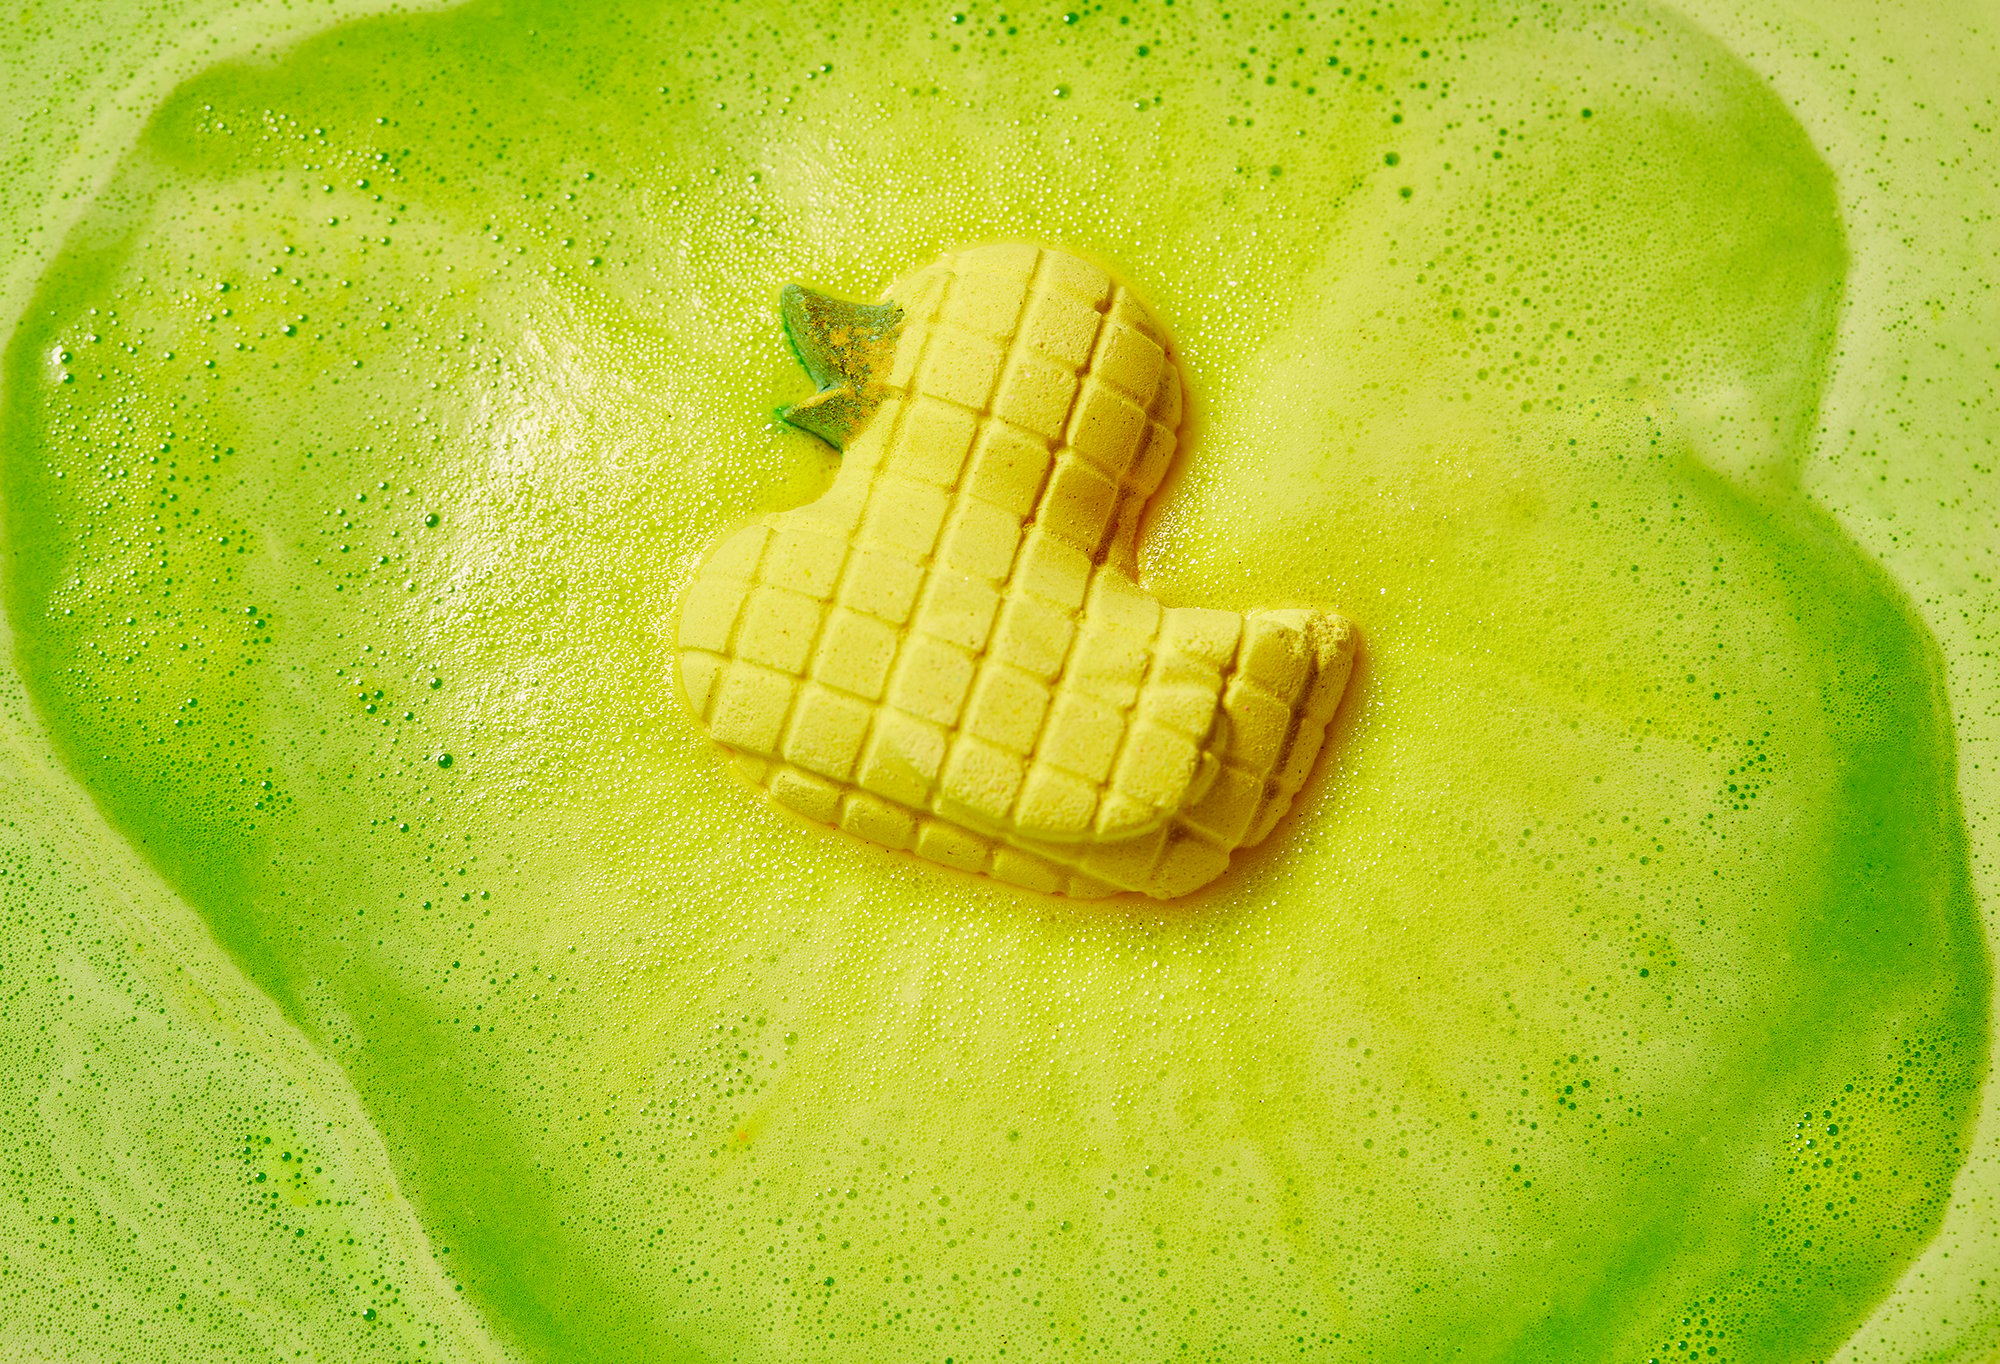 The bath bomb floats on its side in lime green water, giving off yellow hued fizzing foam.